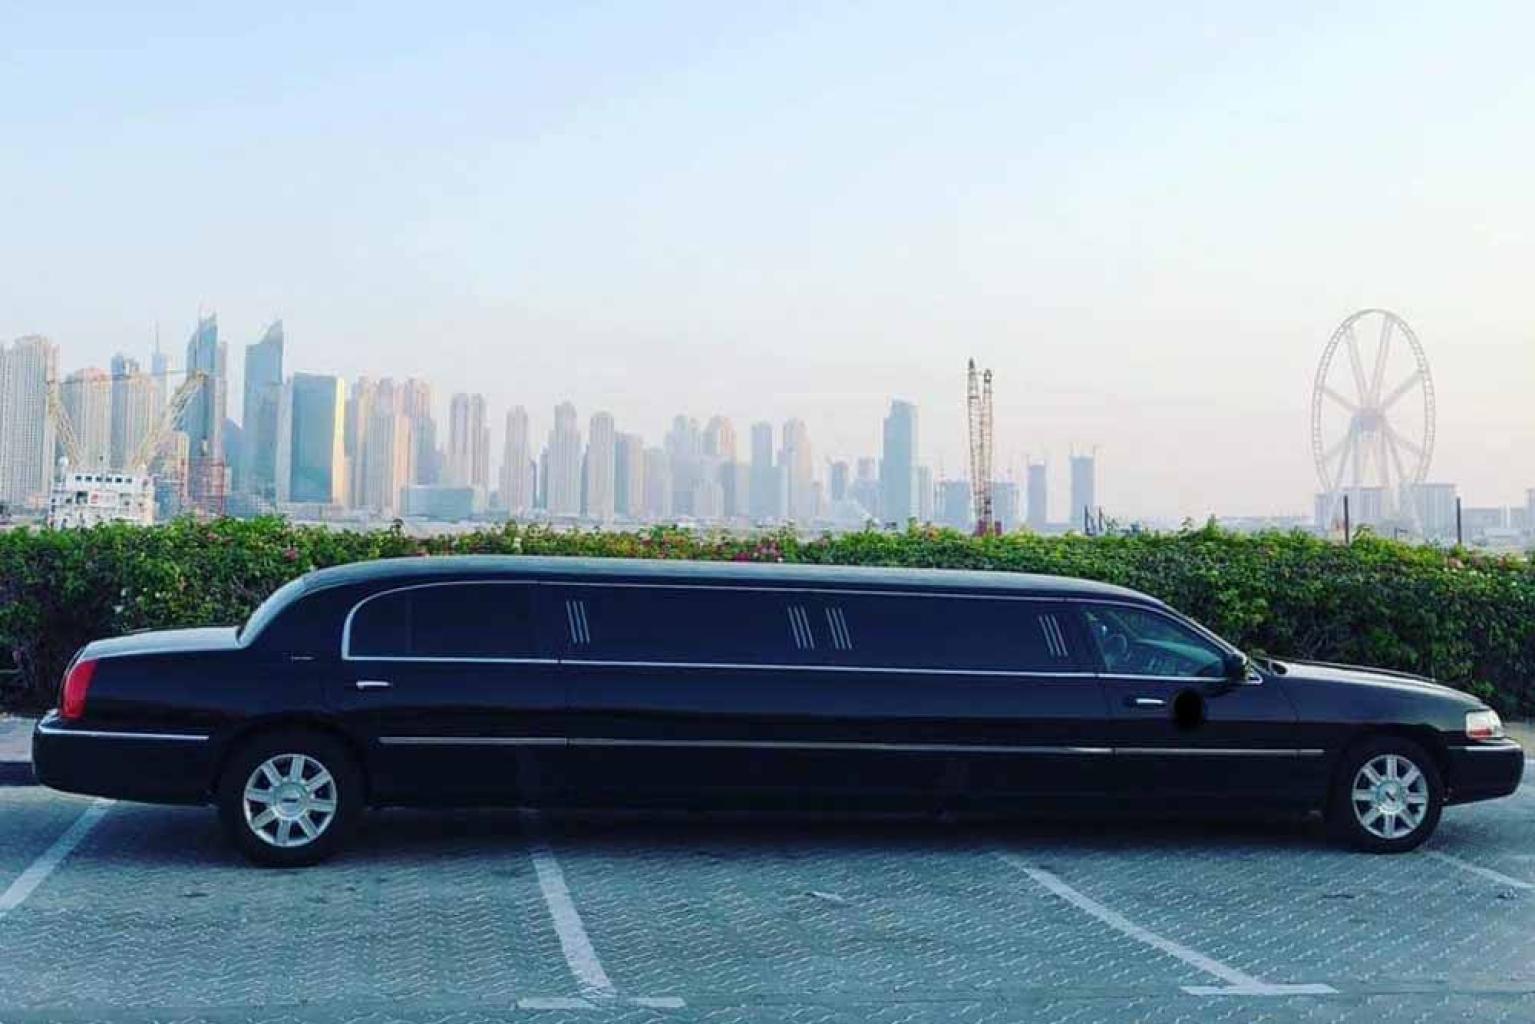 Why Limousine Service Is Important?